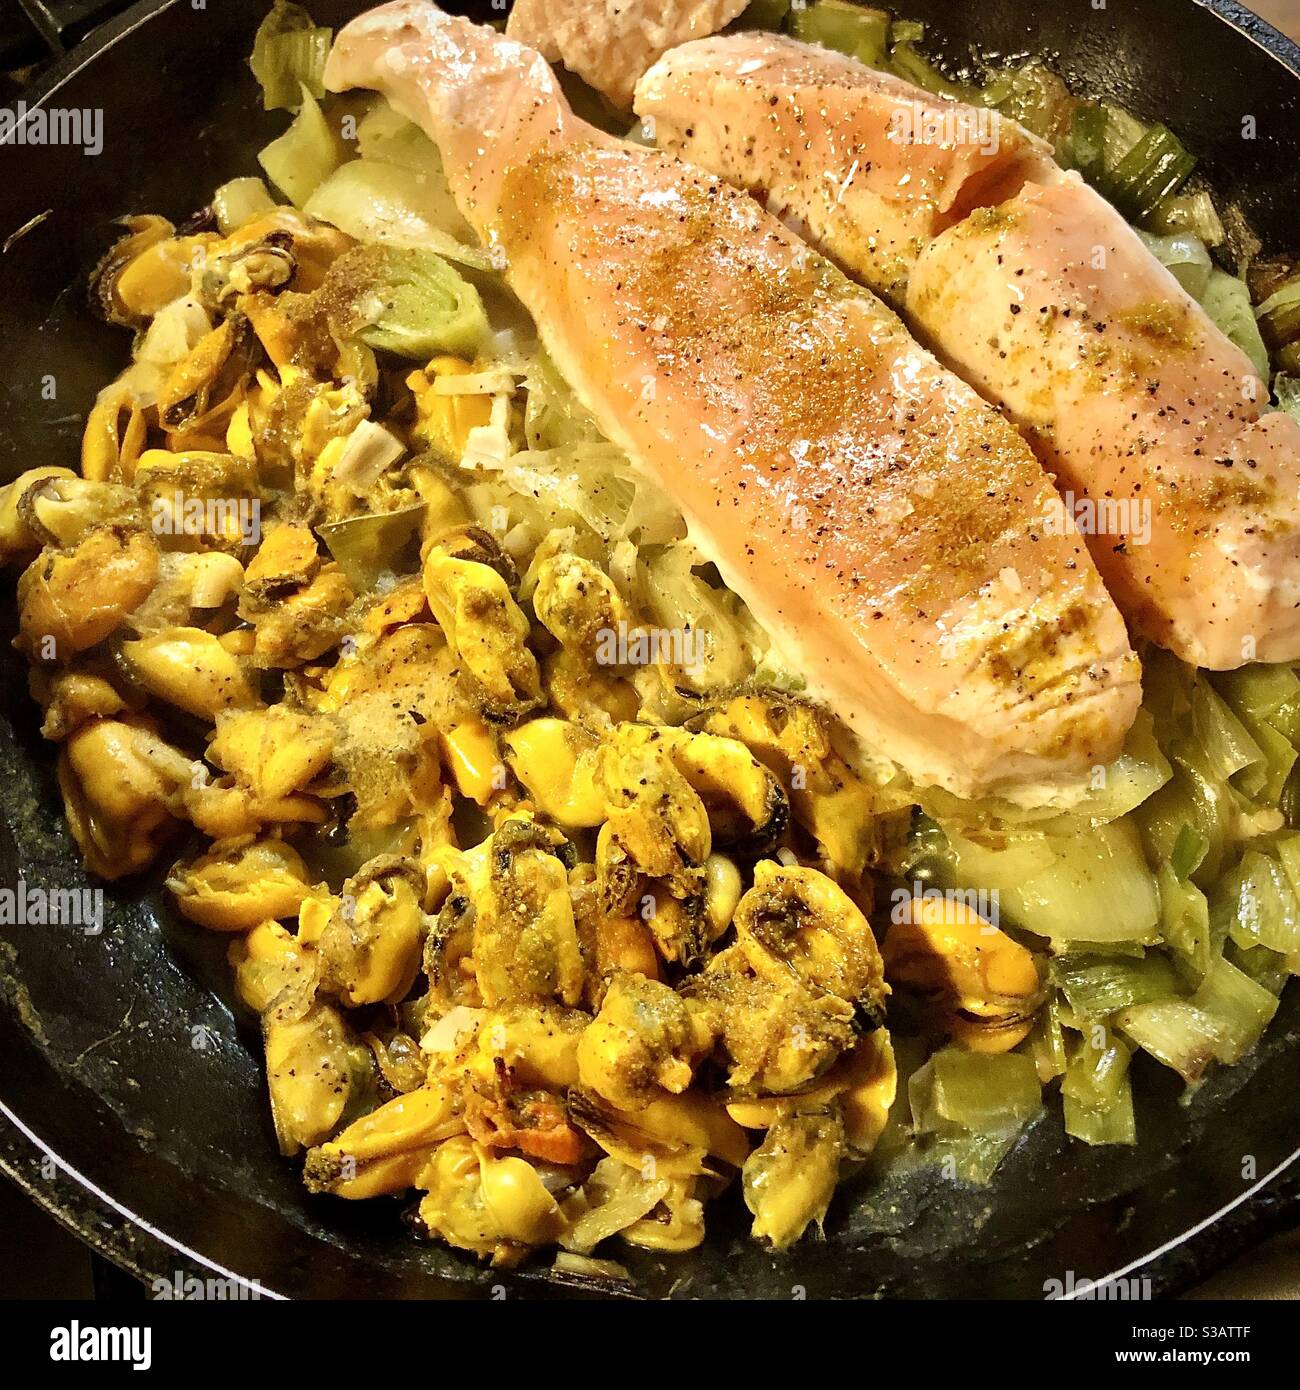 Healthy hot meal of fresh salmon and mussels with leeks. Stock Photo